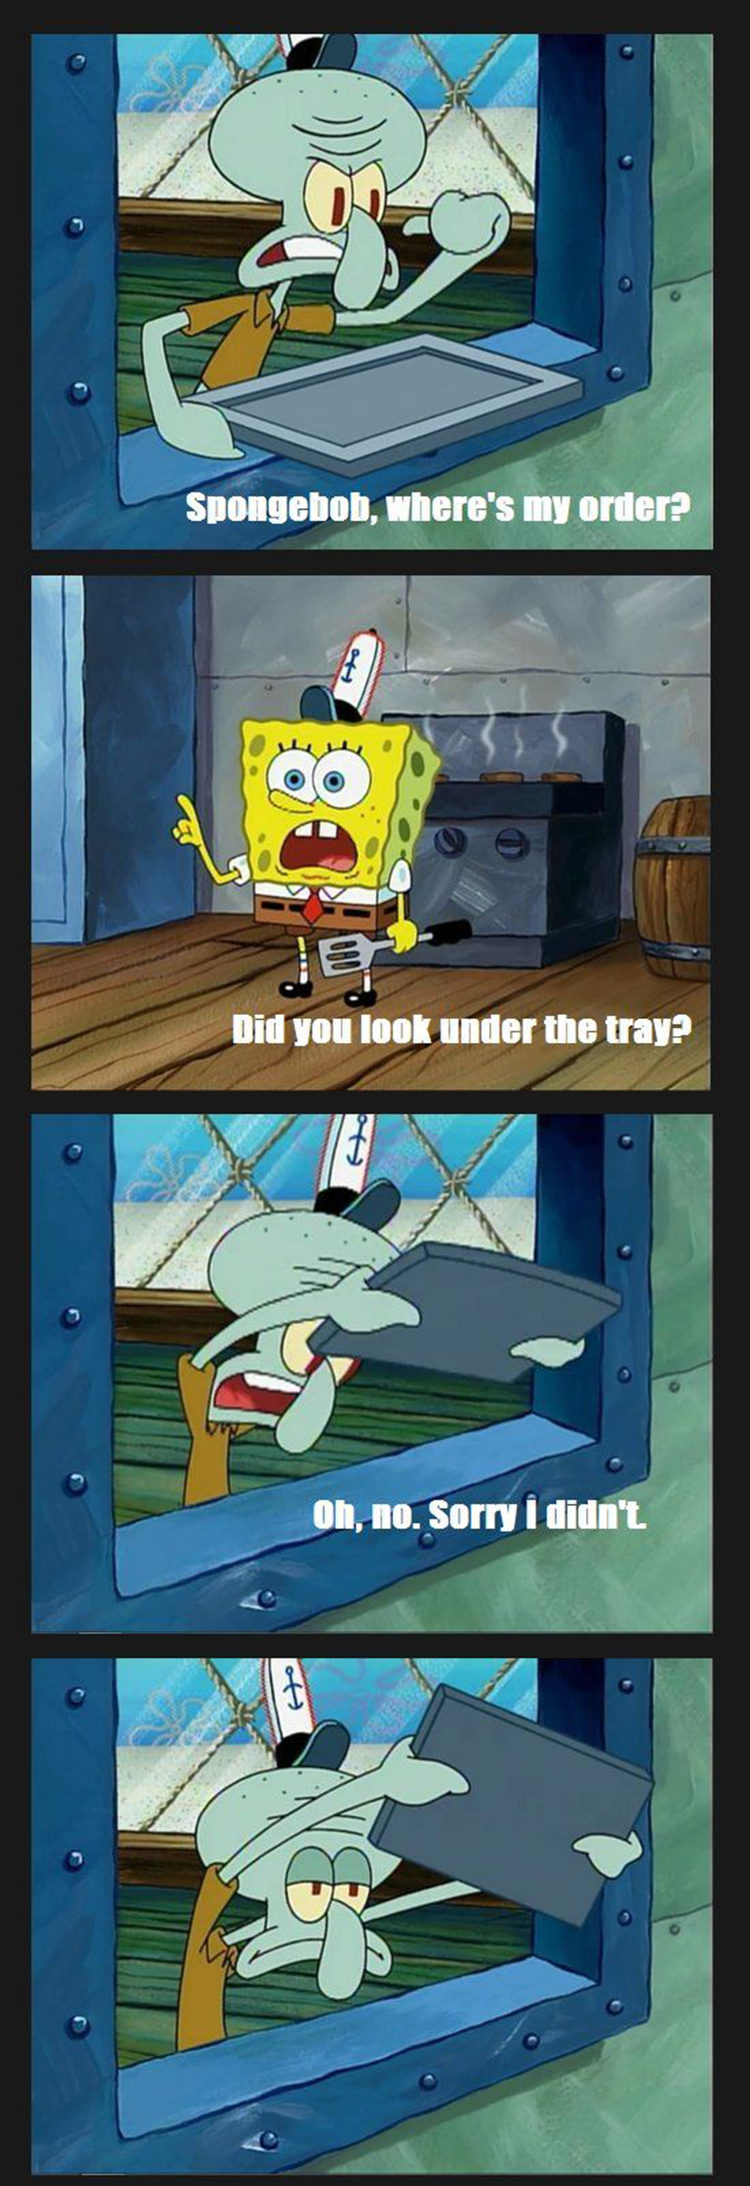 Squidward, did you look under the tray?